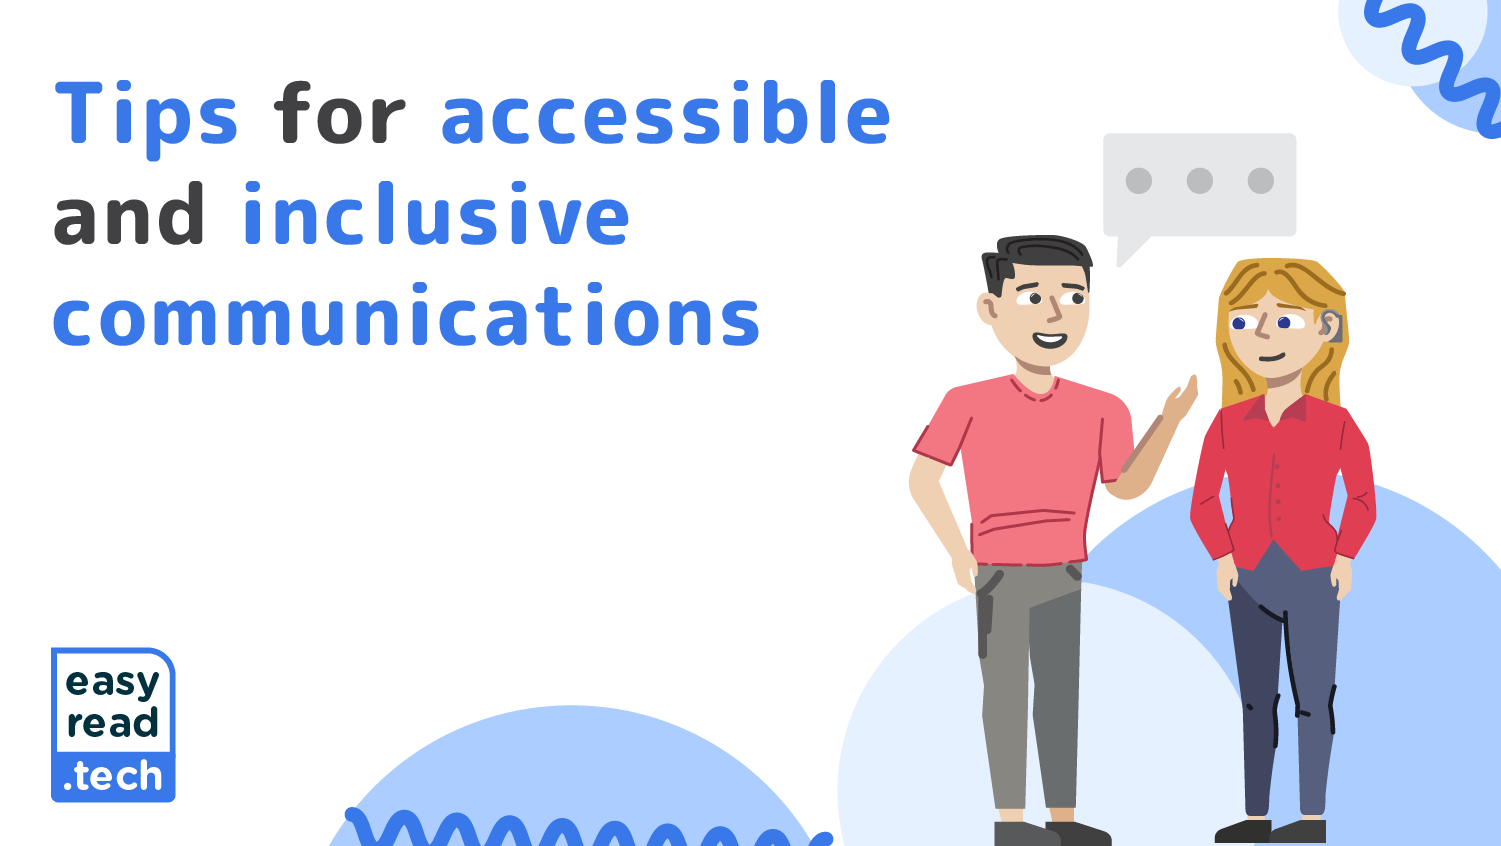 Tips for accessible and inclusive communications